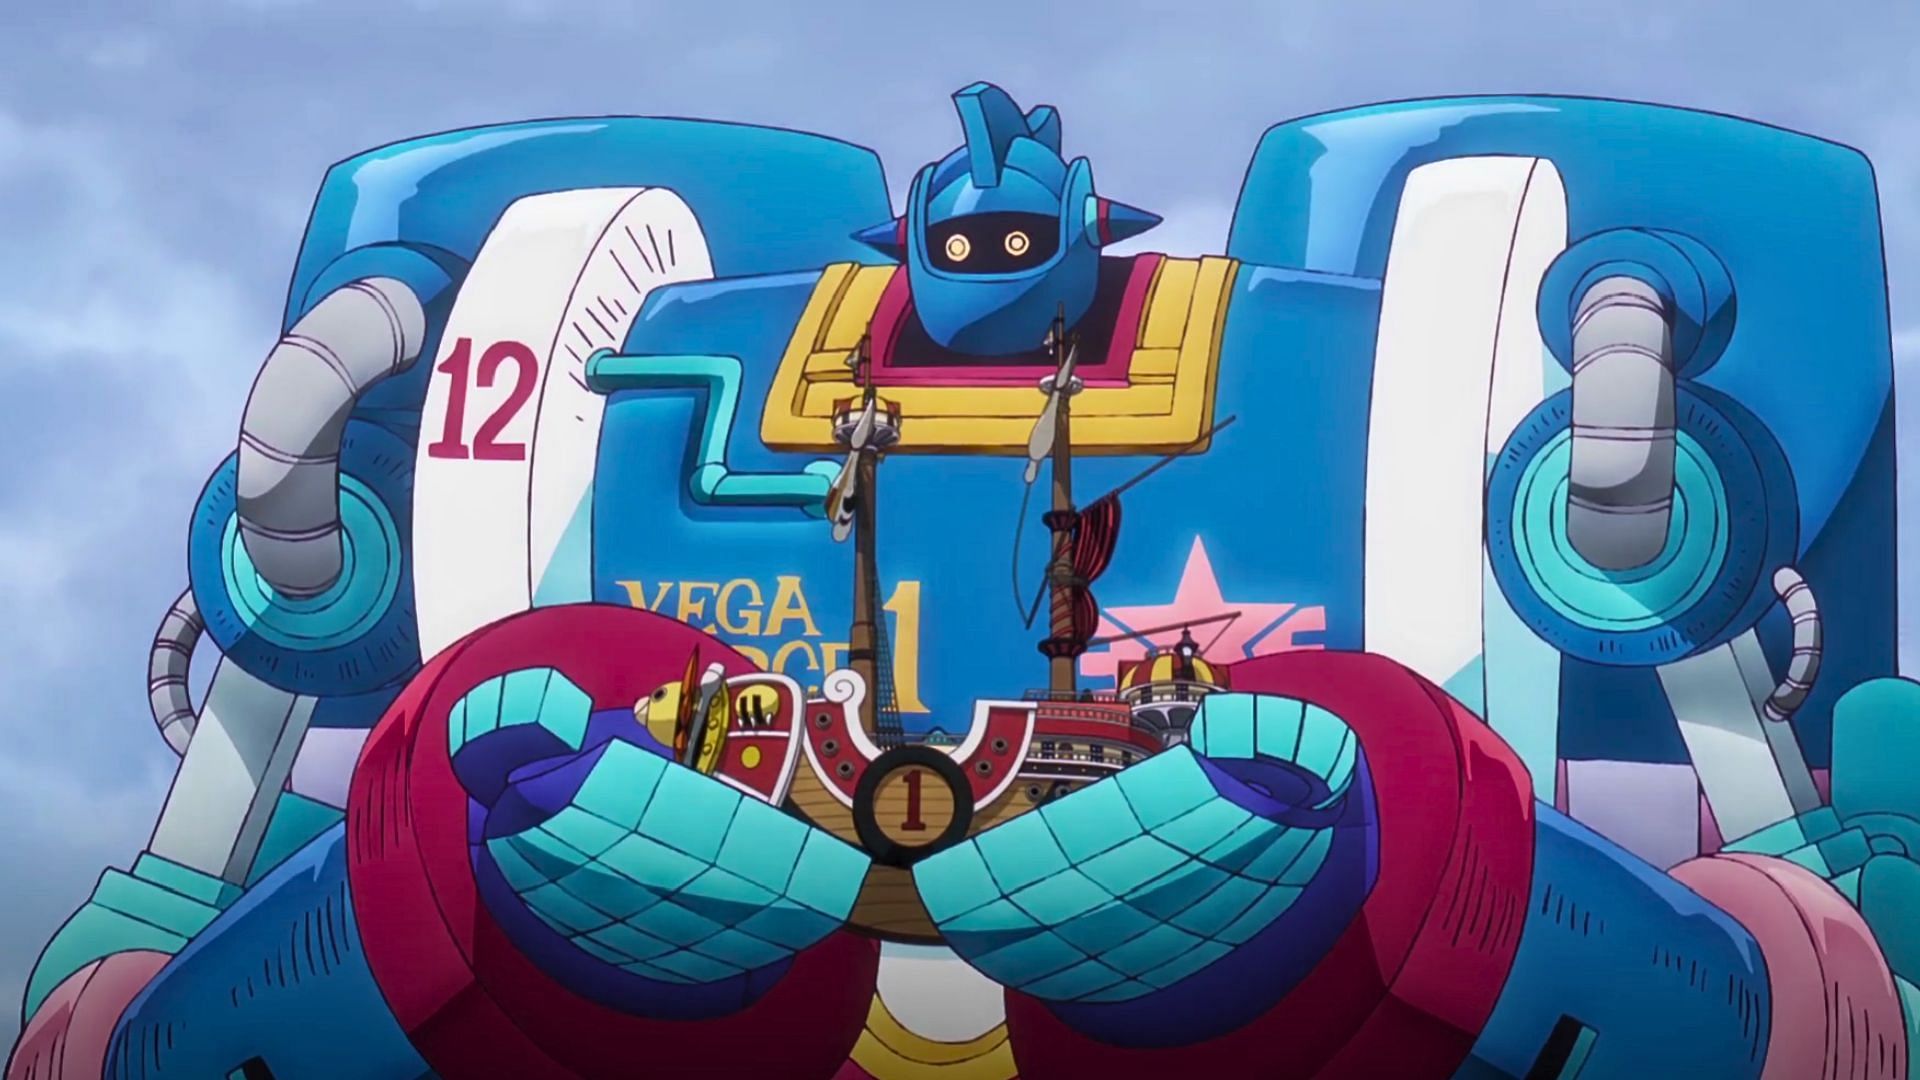 Vegaforce-01 carrying the Thousand Sunny as seen in One Piece episode 1094 (Image via Toei)